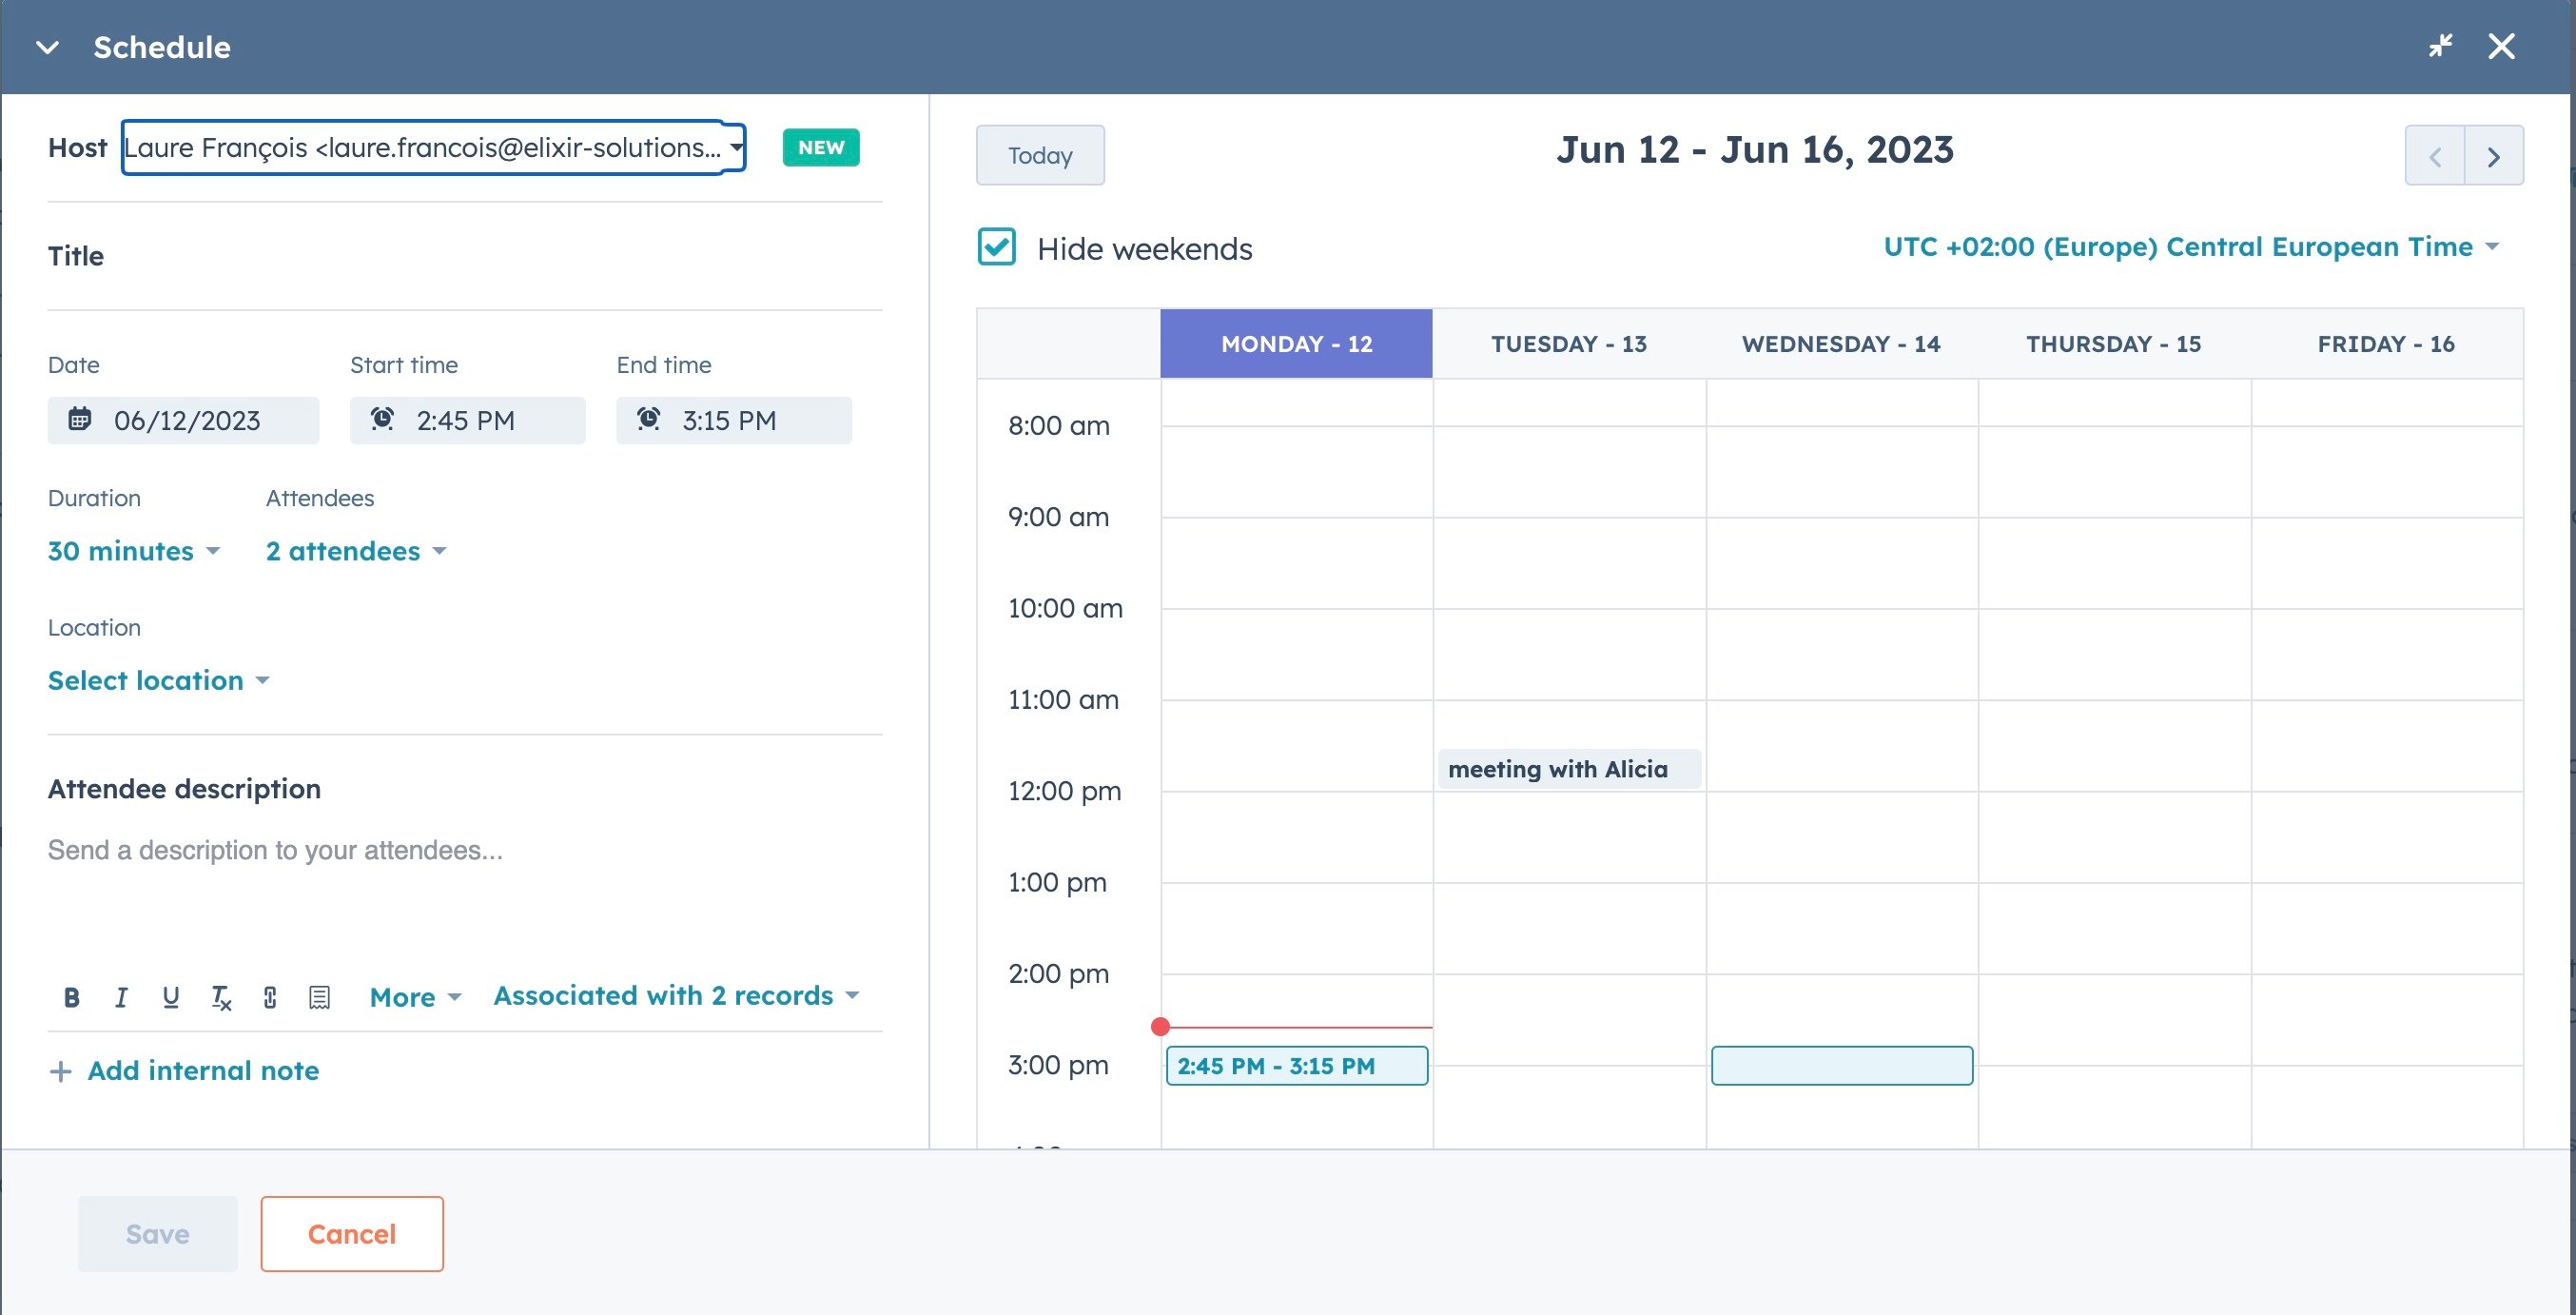 Include a screenshot of the Outlook calendar with an added event from a contact record in HubSpot. Highlight the synced events and their visibility in both platforms.